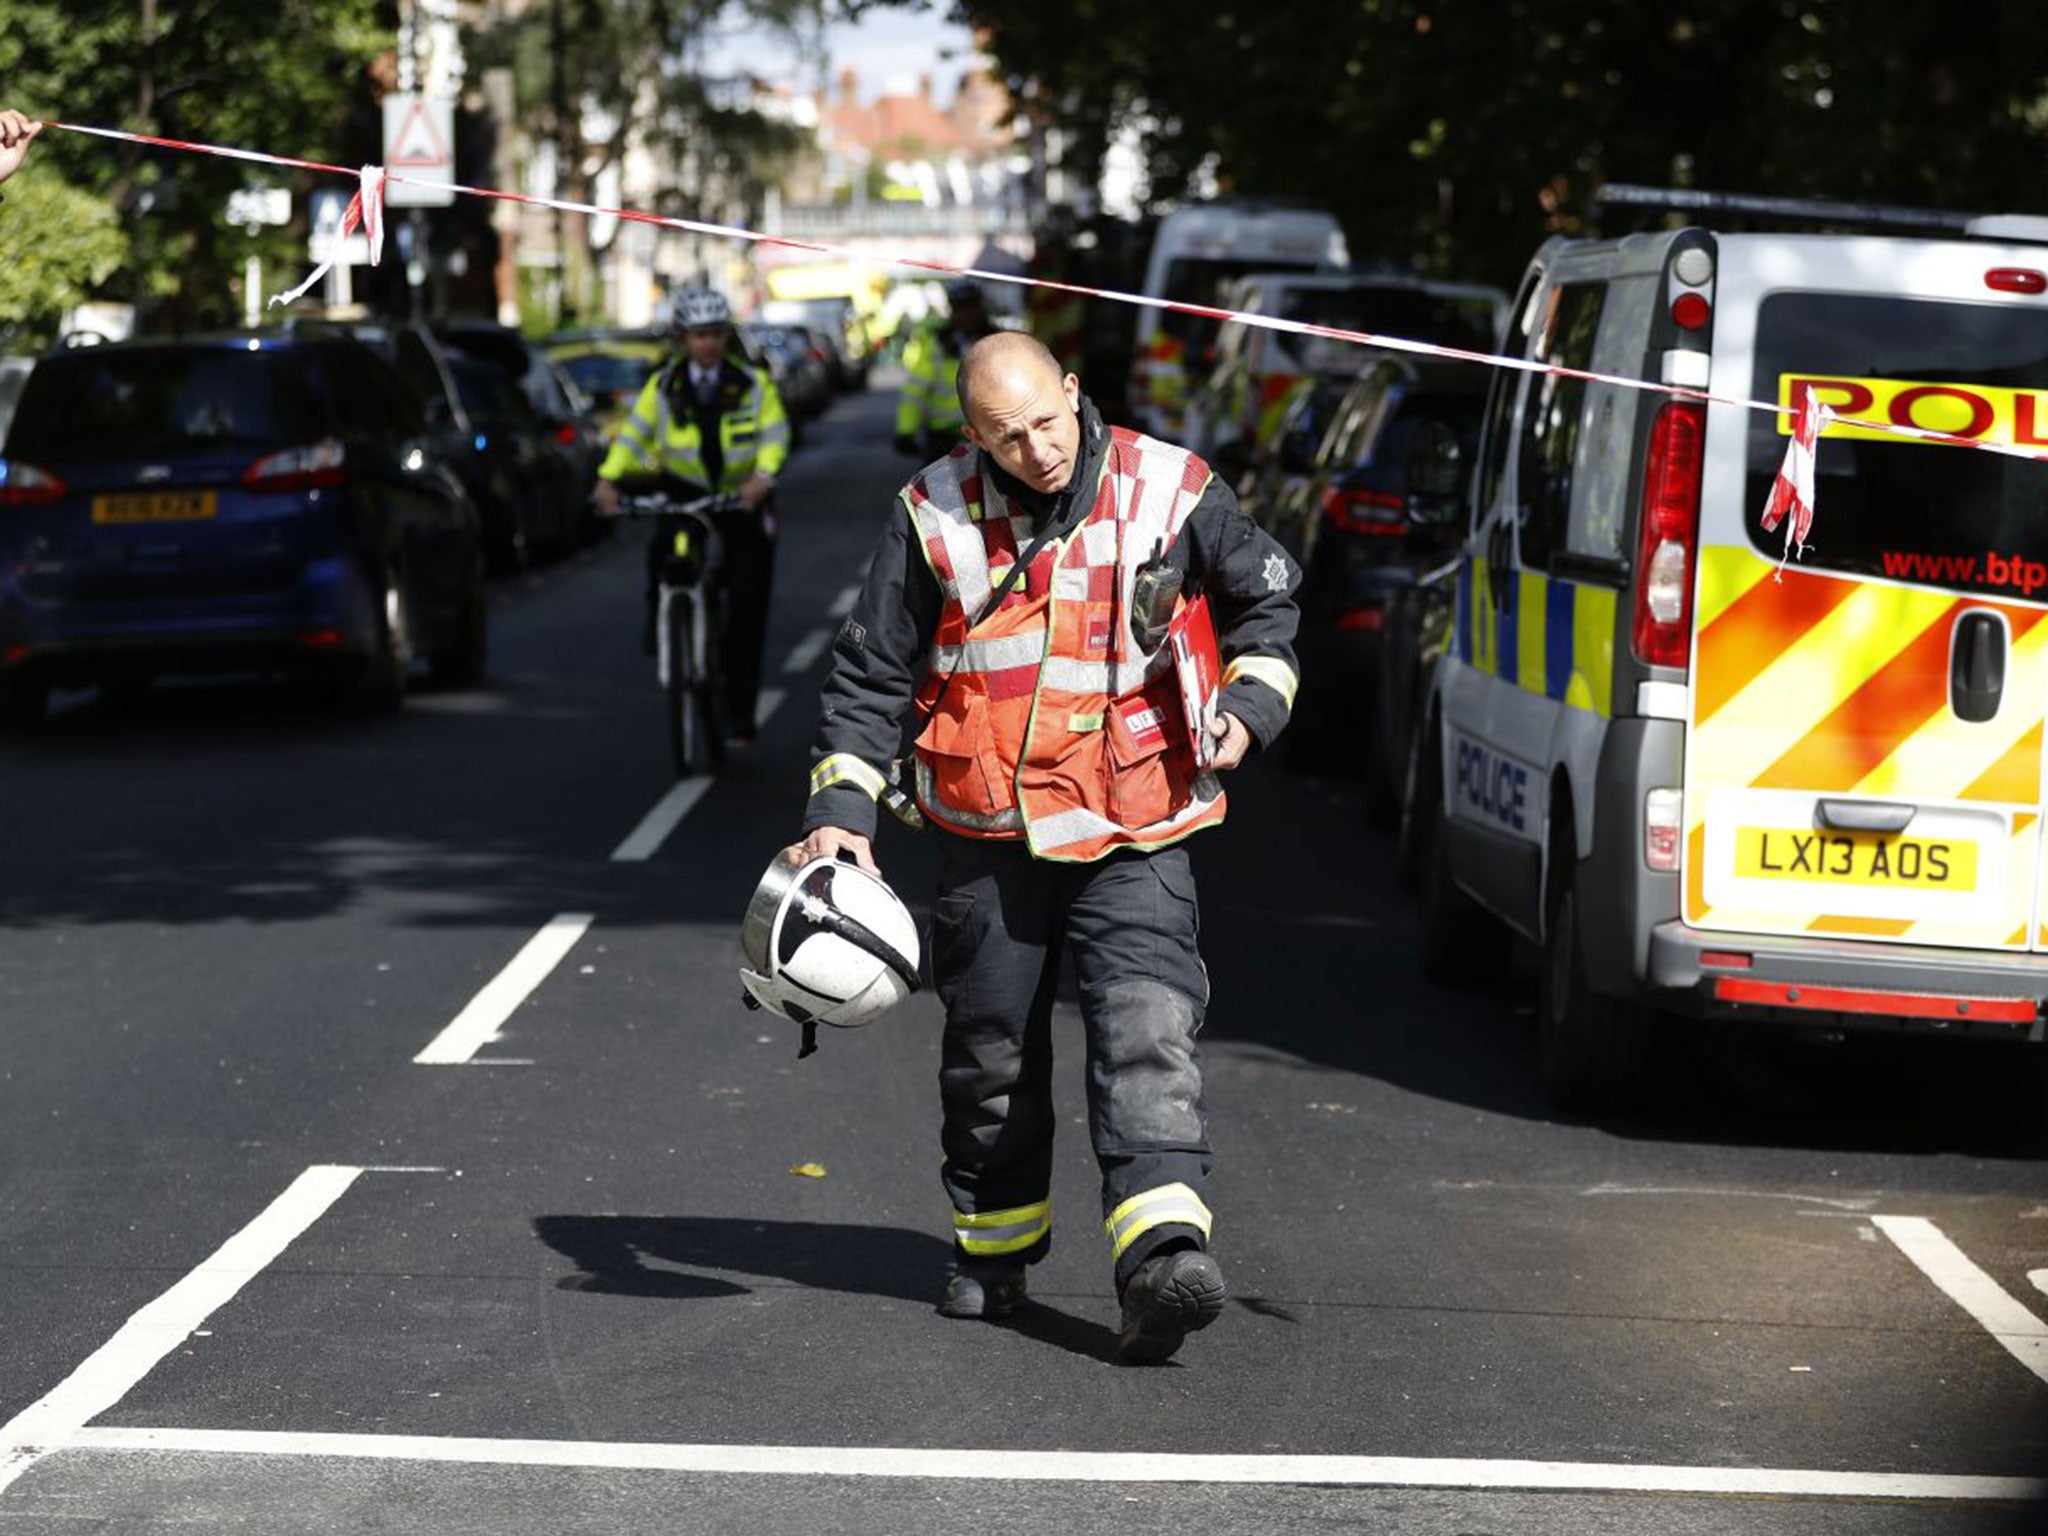 A terror attack at Parsons Green tube station has left many questioning the motive